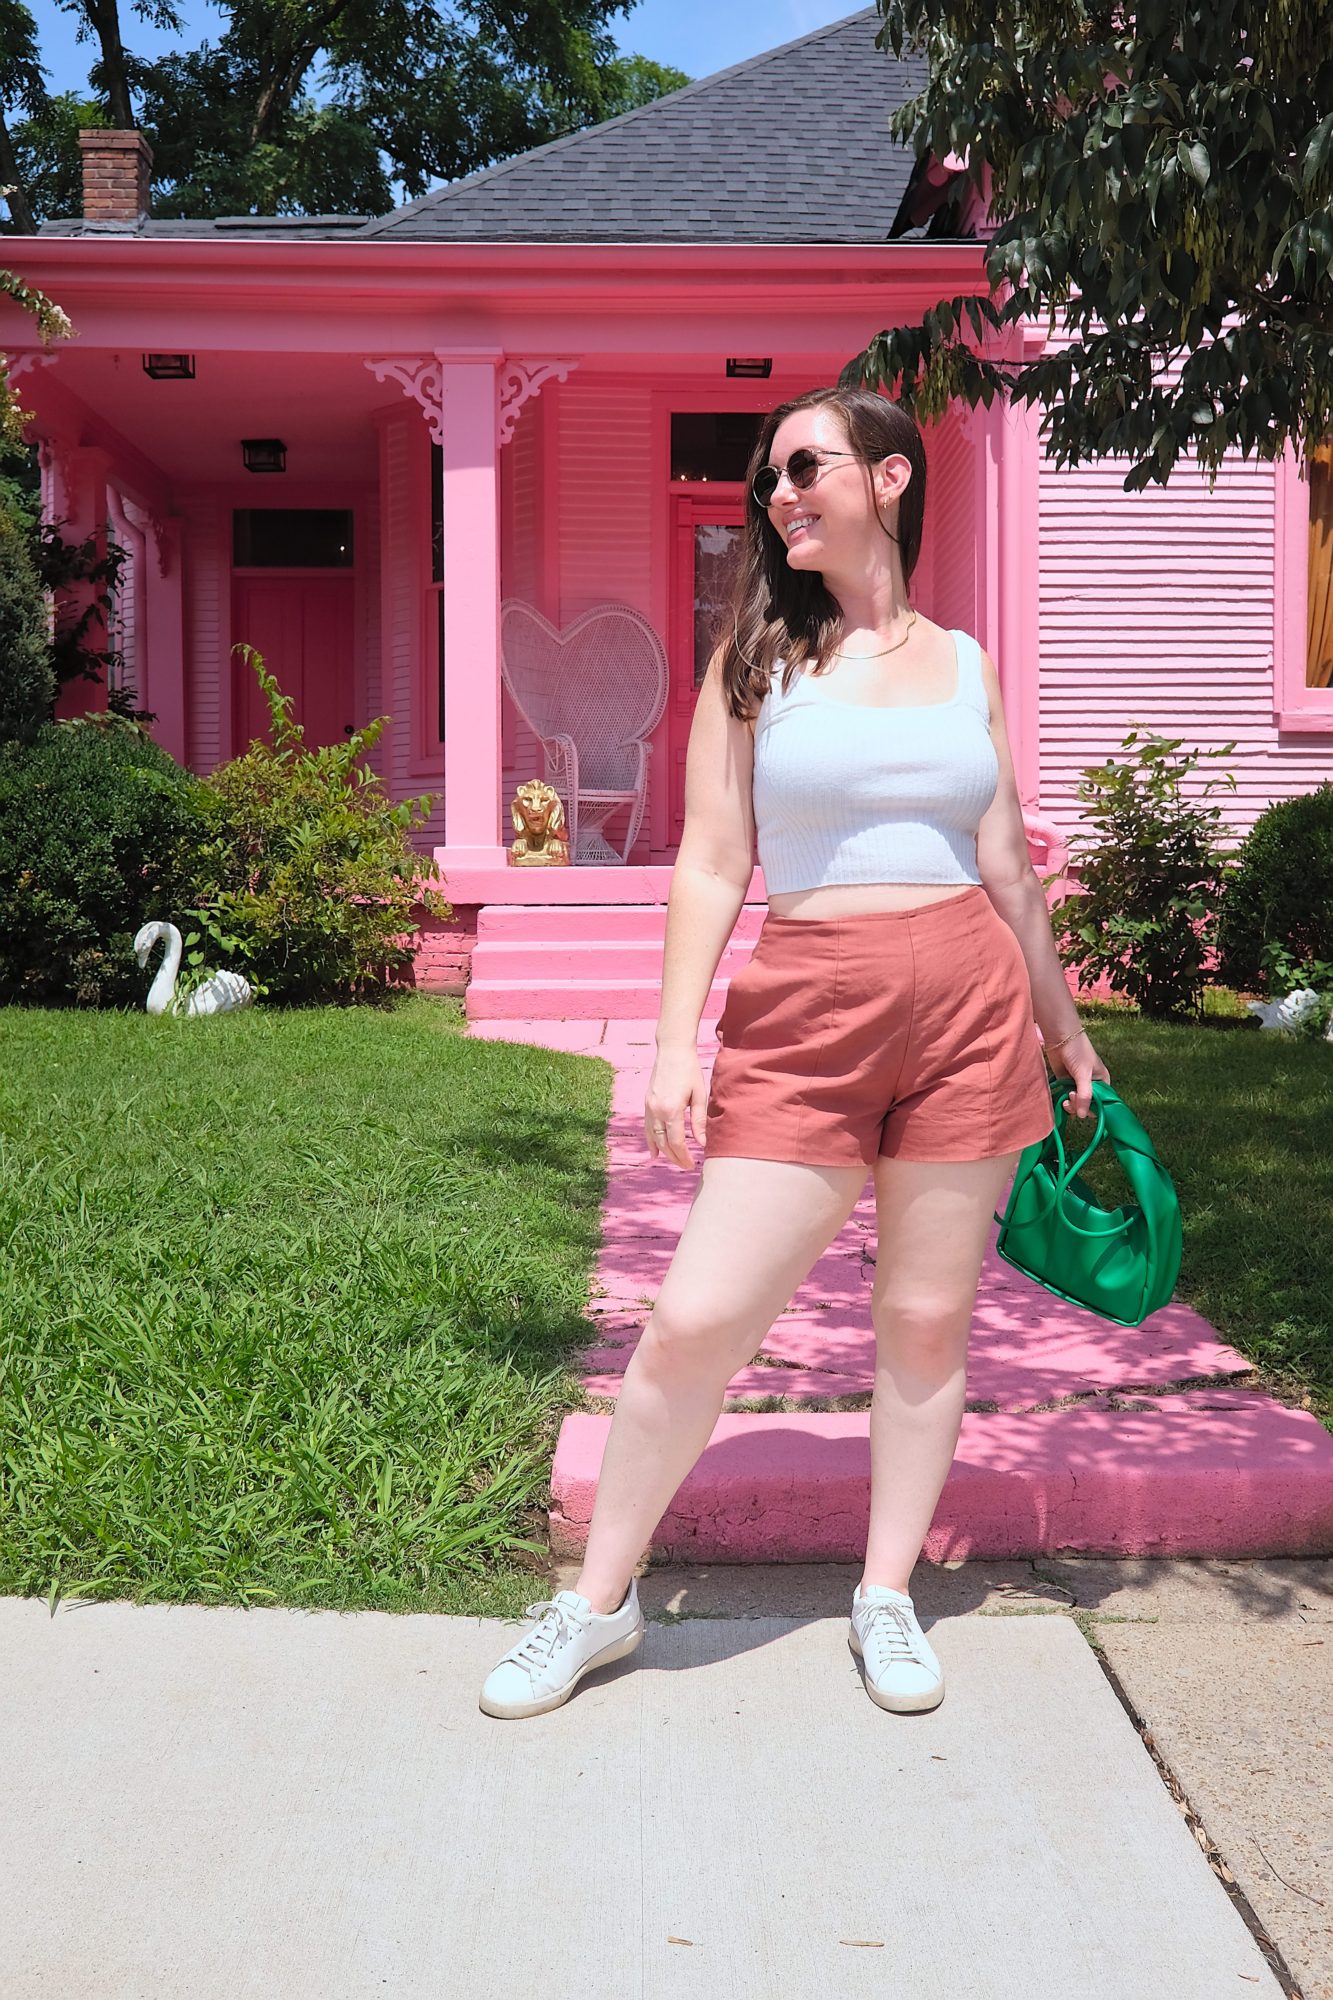 Alyssa wears a white top and rust shorts in front of a pink house